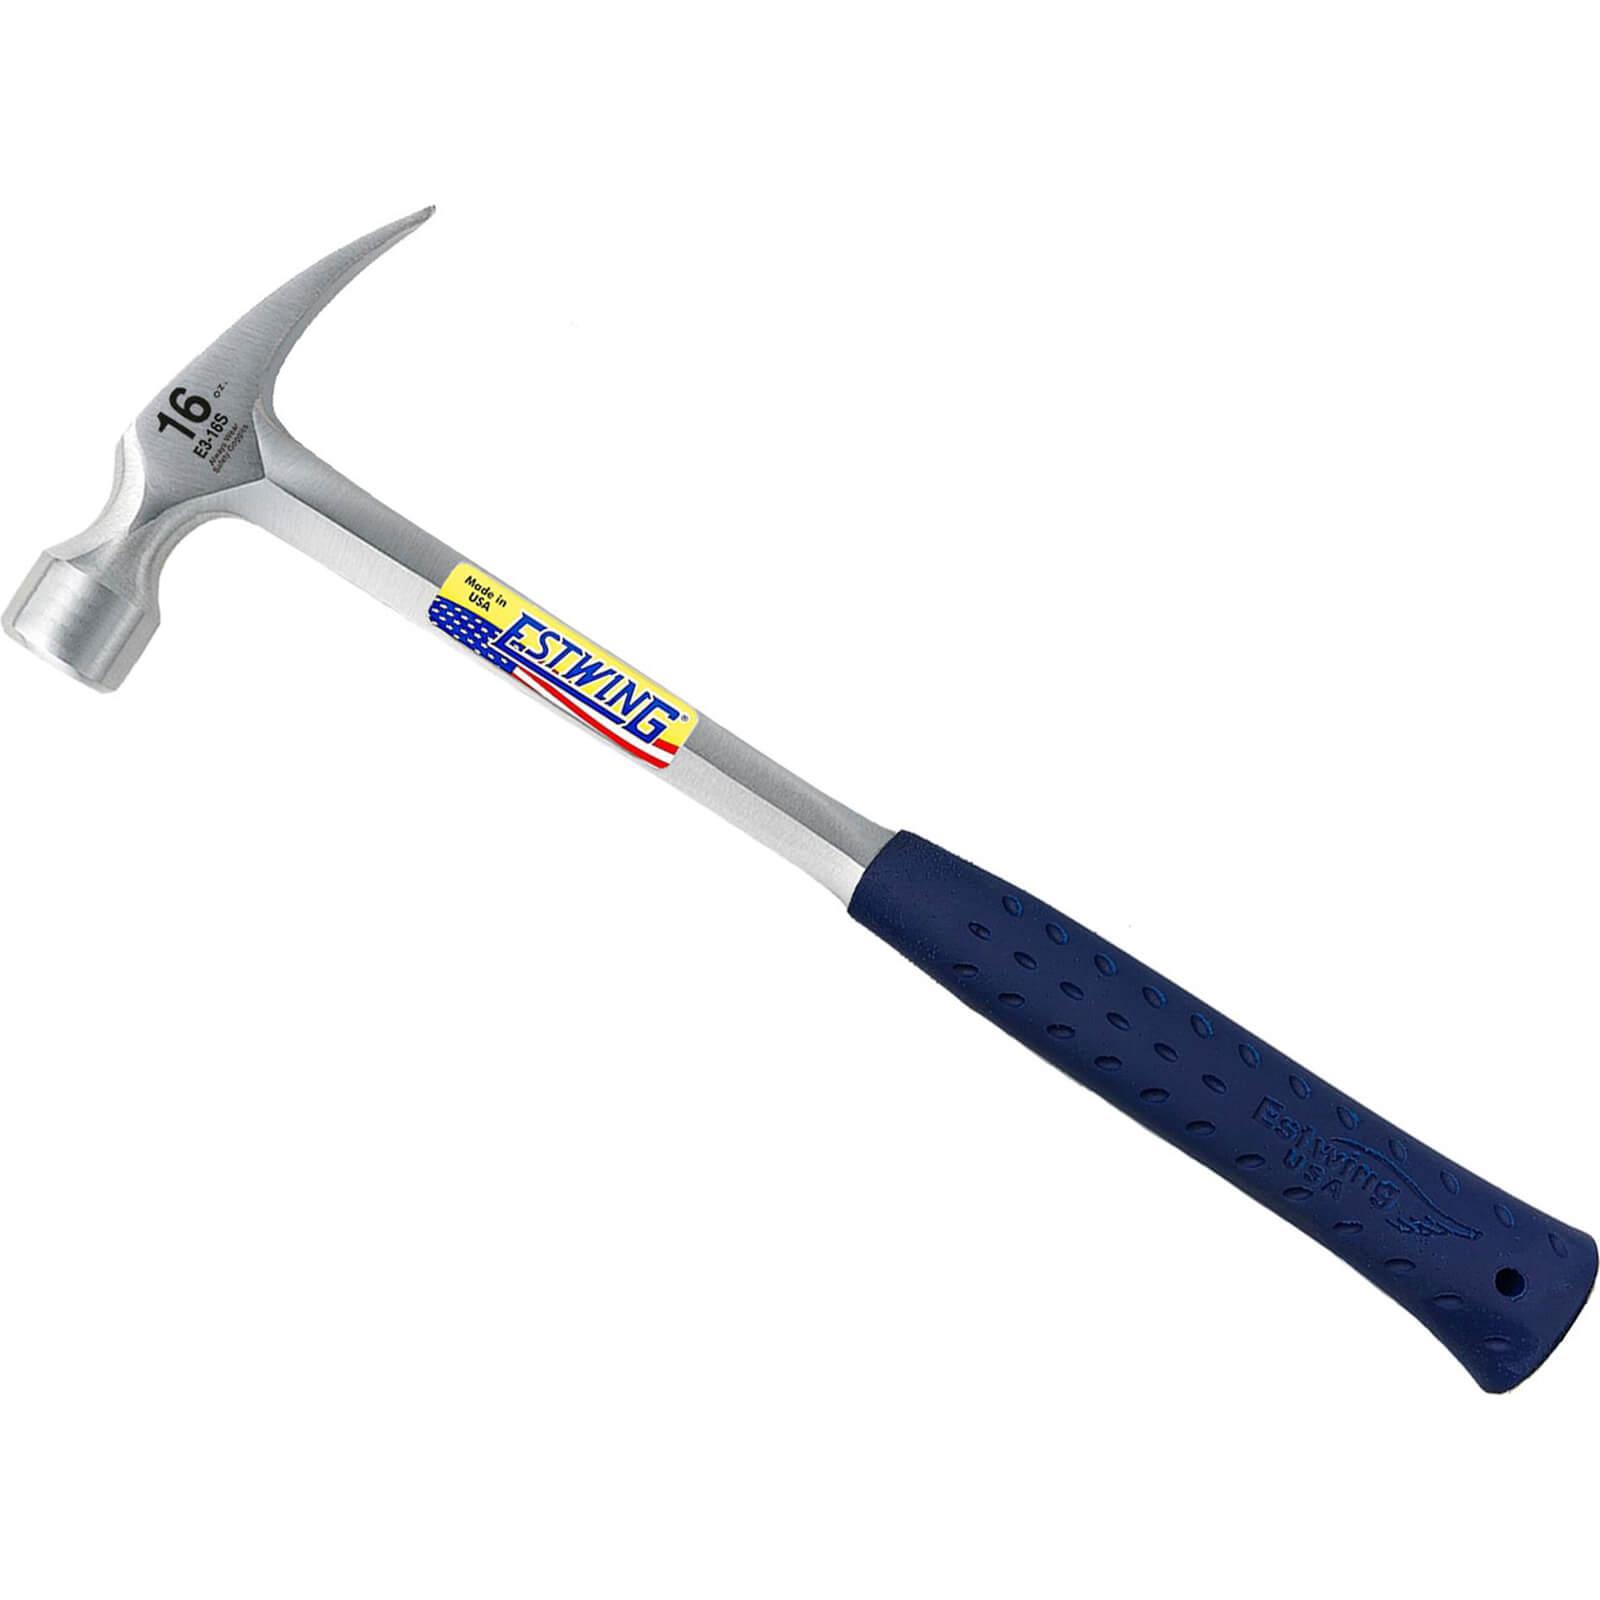 Image of Estwing Straight Claw Hammer 450g